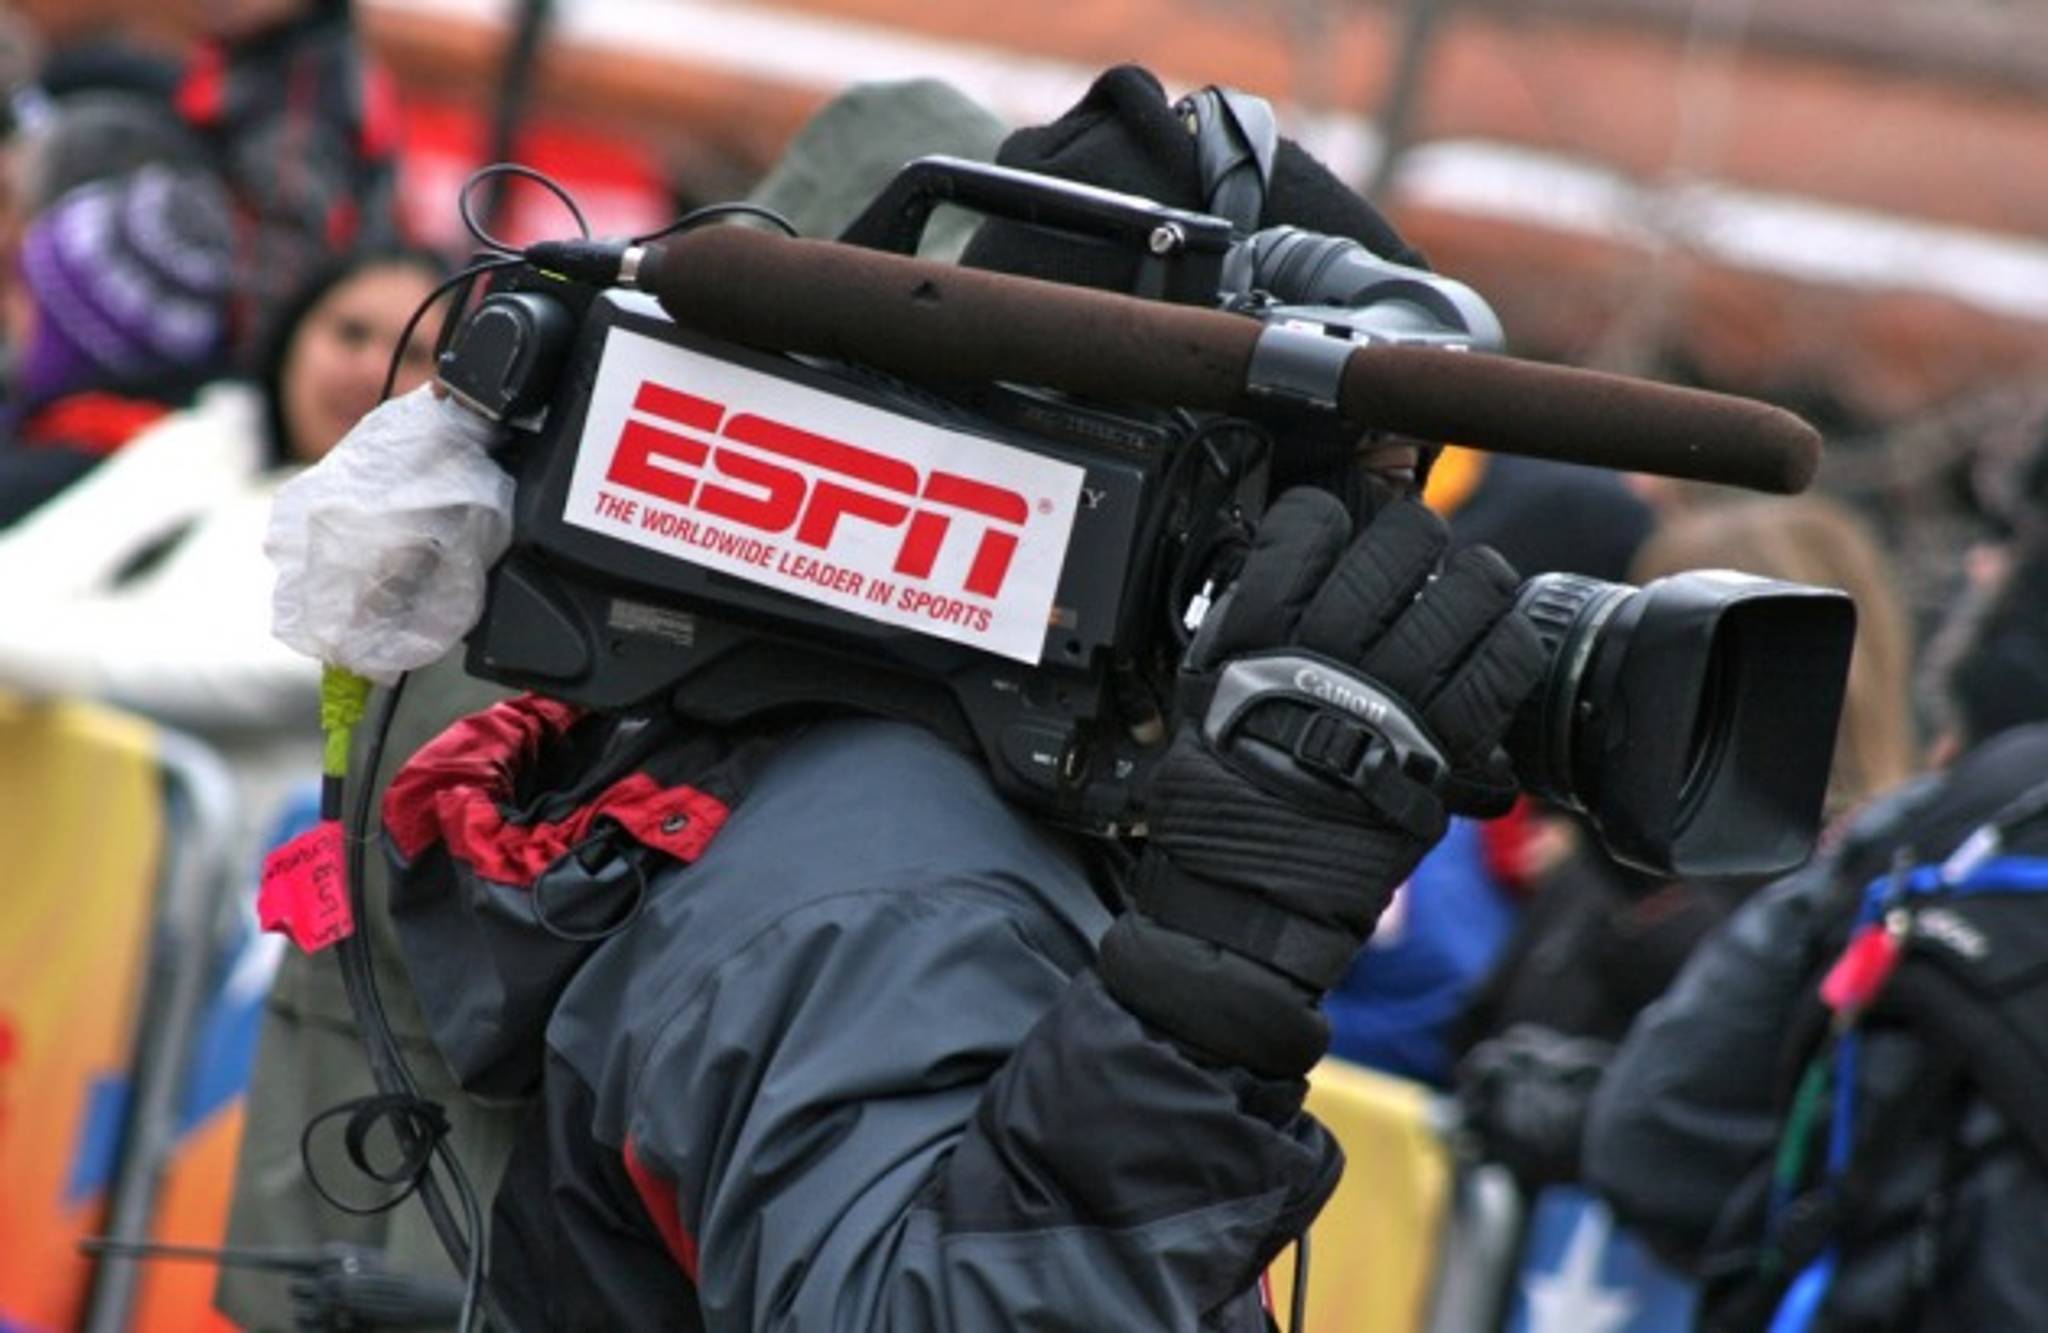 How ESPN is becoming the 'first screen' for sport